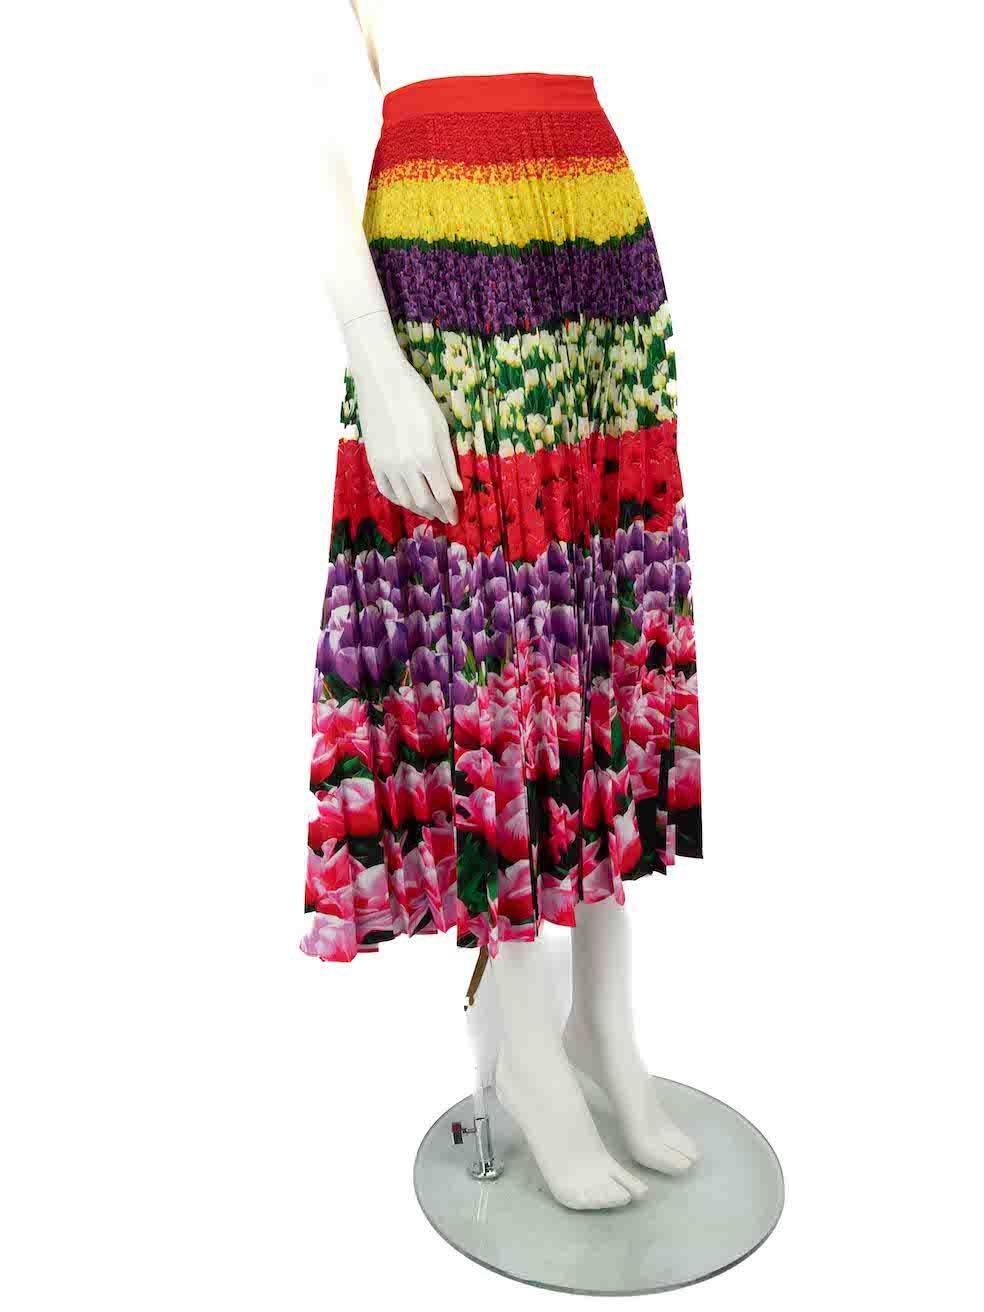 CONDITION is Very good. Hardly any visible wear to skirt is evident on this used Mary Katrantzou designer resale item.
 
 
 
 Details
 
 
 Multicolour - red and purple
 
 Polyester
 
 Skirt
 
 Floral pattern
 
 Midi
 
 Pleated
 
 Side zip and hook